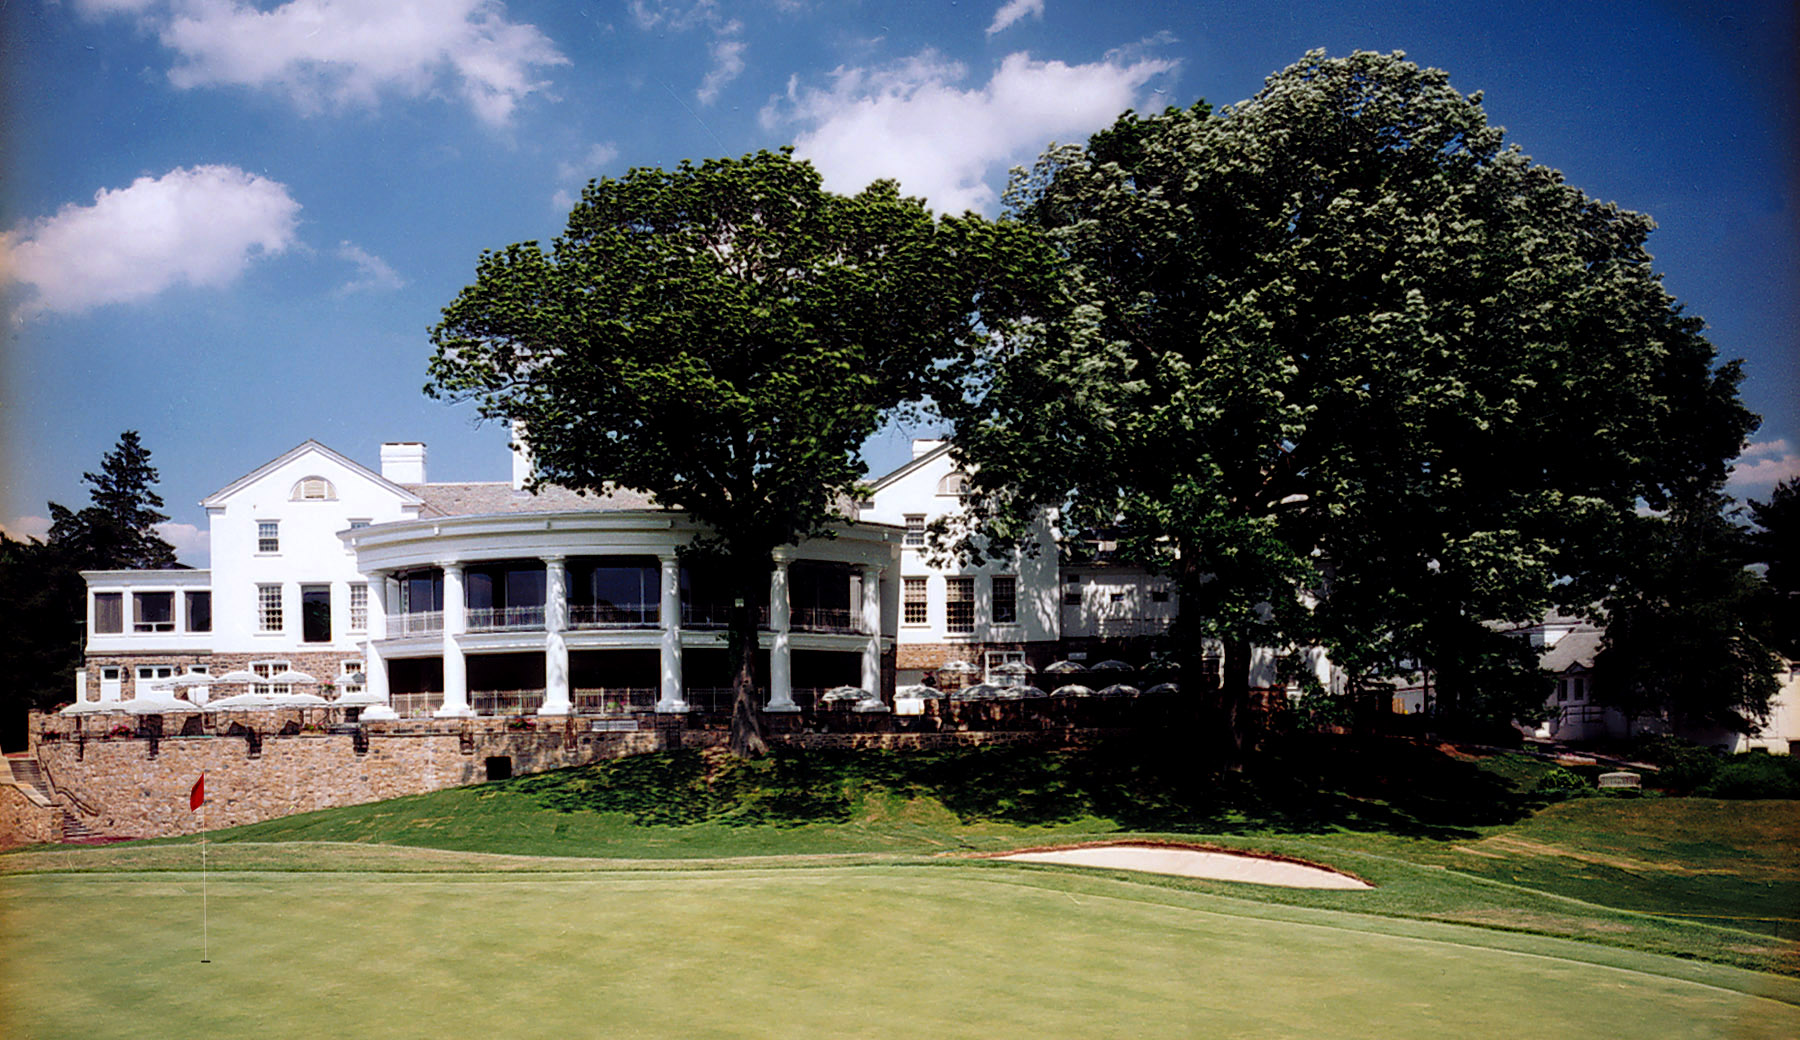 Lothrop Associates expanded the Scarsdale Gold Club dining areas and renovated the lockers rooms.  The view from 18th green shows the large portico and deck with columns and exterior patio.  